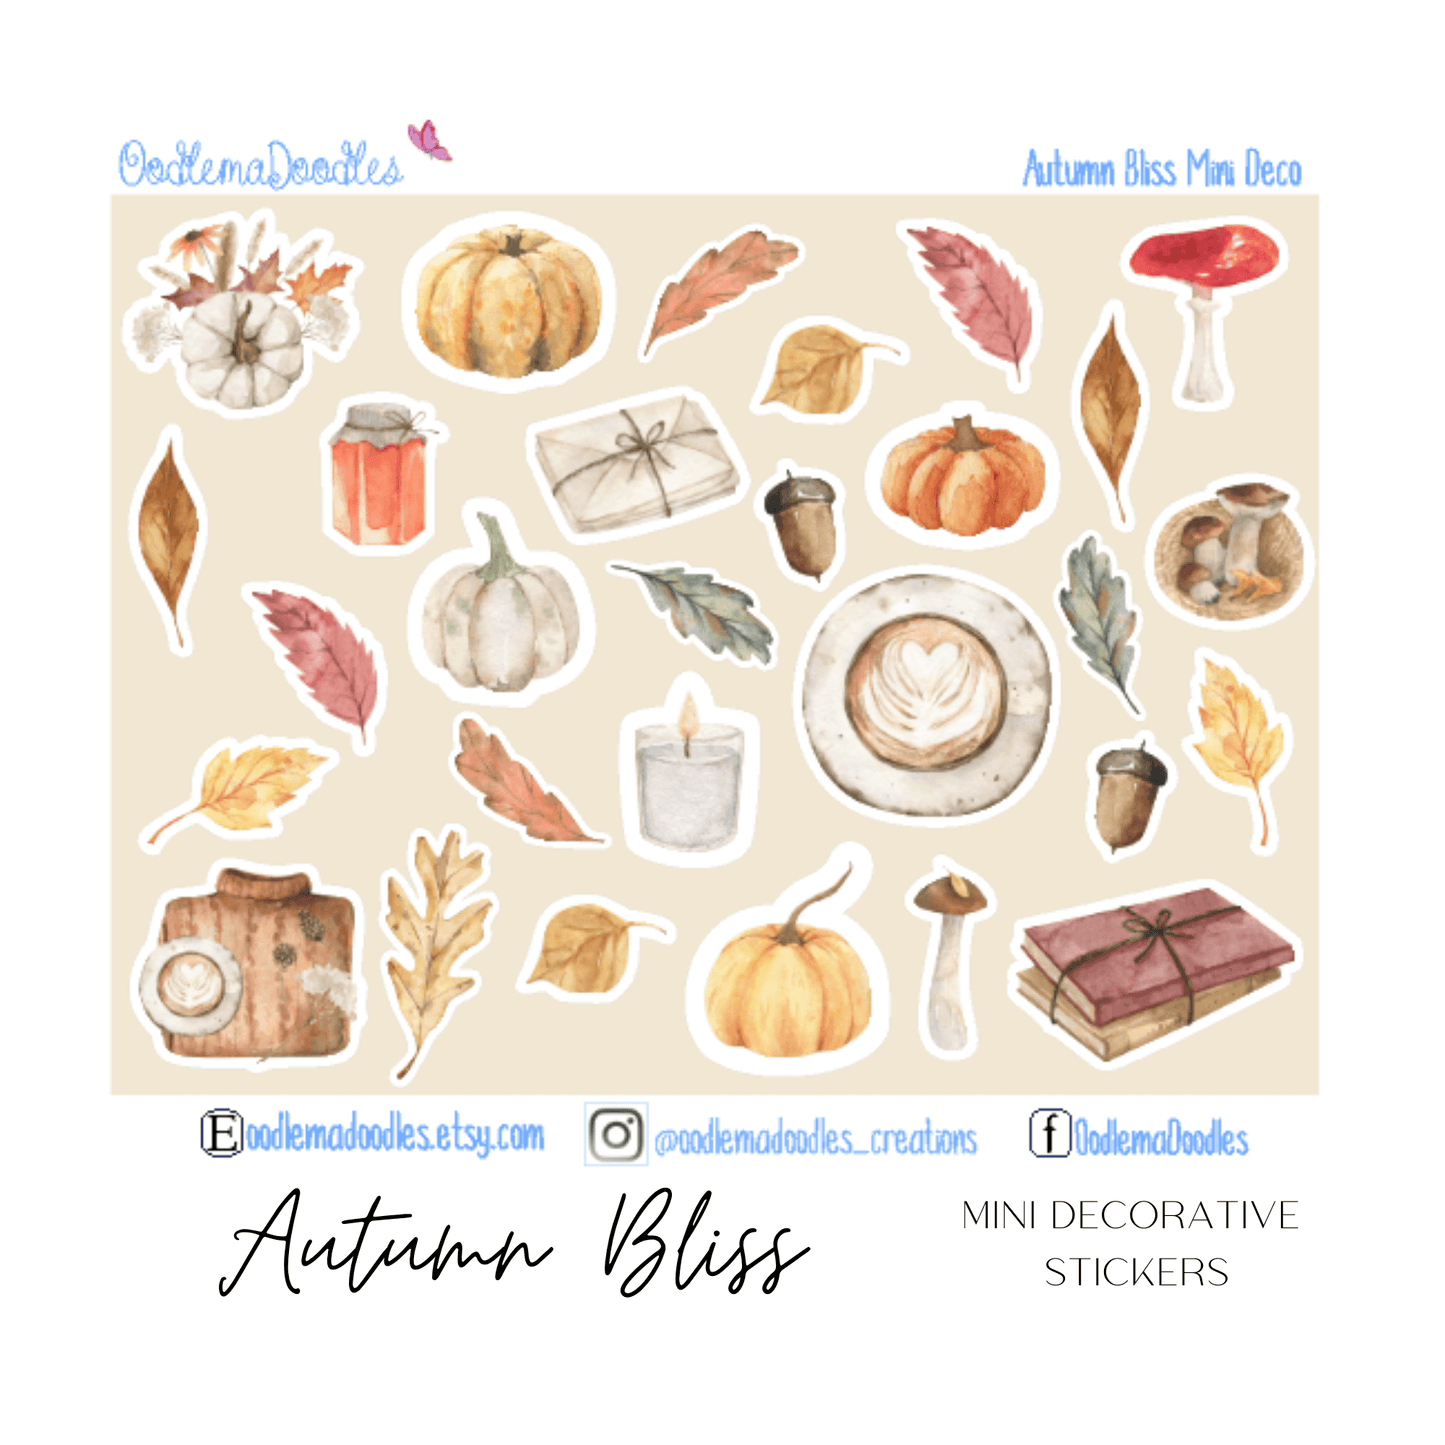 Autumn Bliss Decorative Stickers - oodlemadoodles